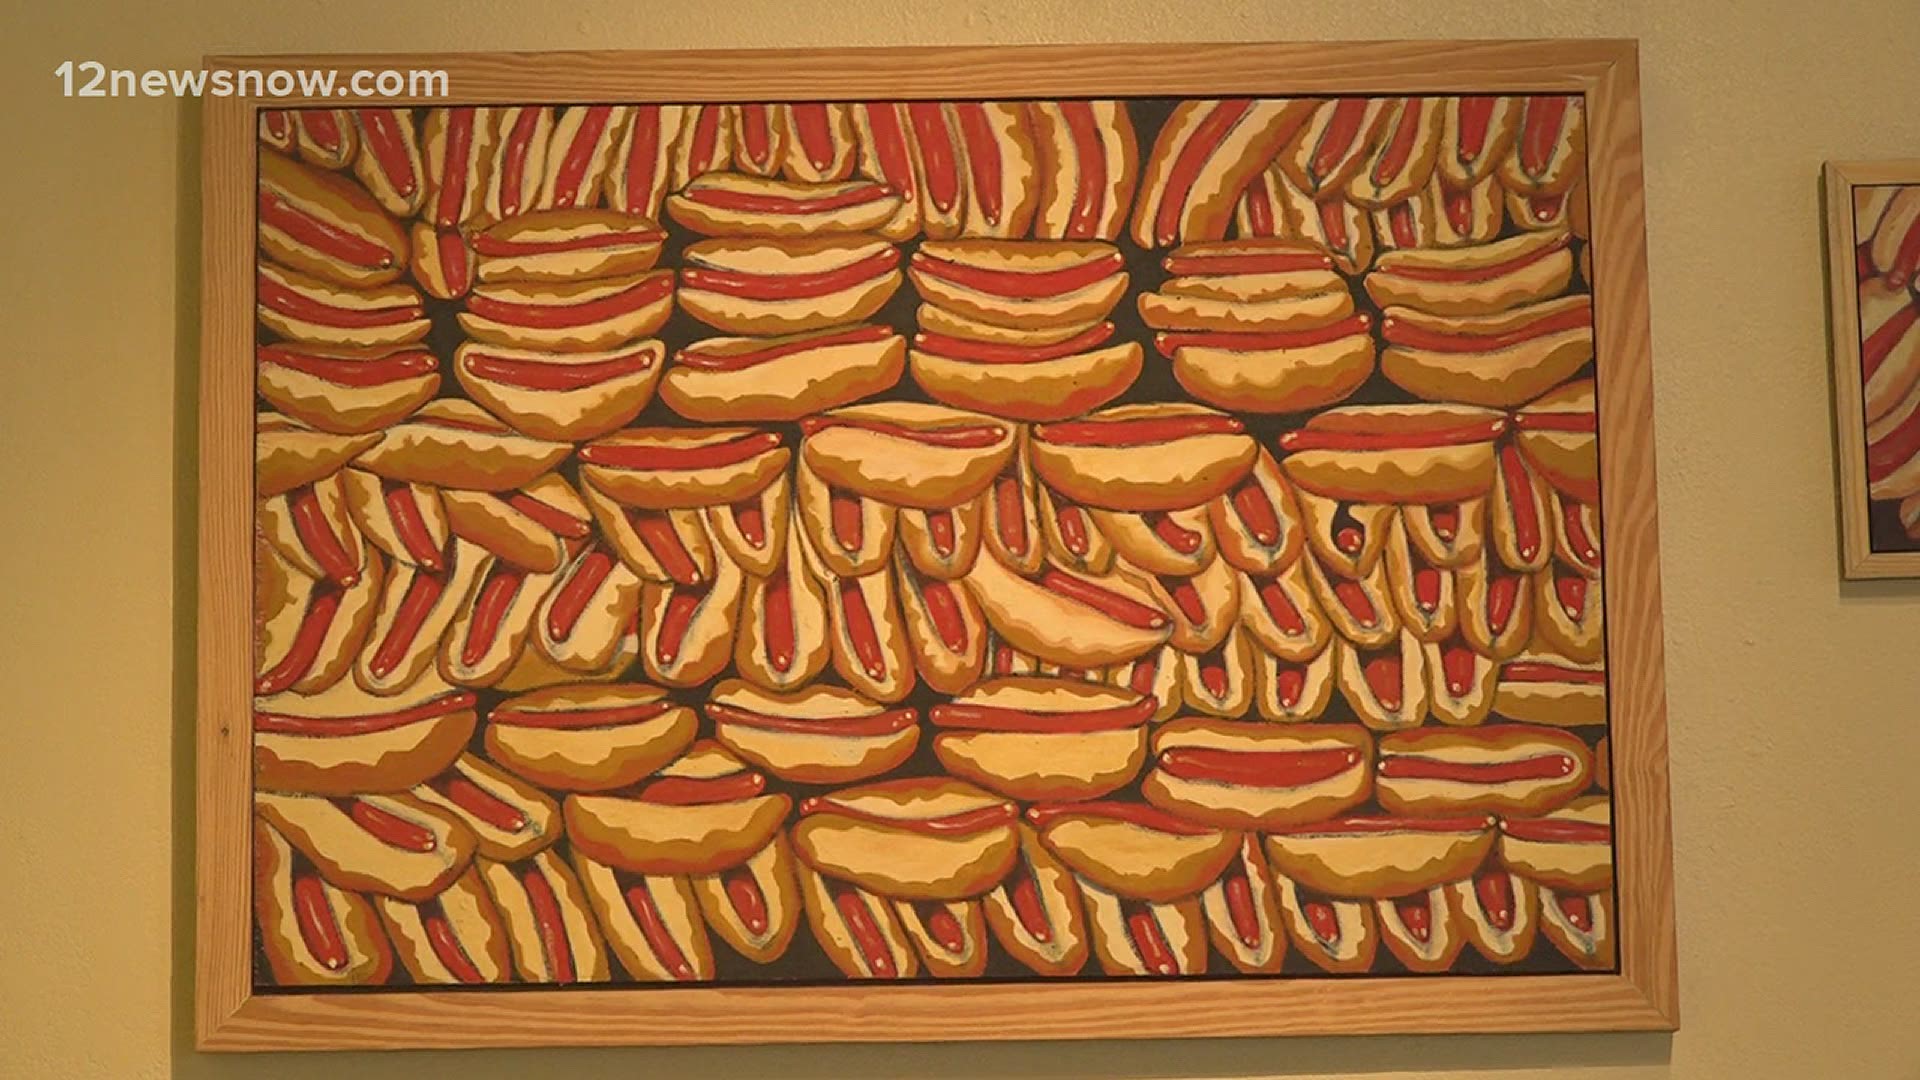 Inspired by Joey Chestnut's hot dog eating contest in 2019, Kevin Clay, Hotdog exhibit artist, was eager to bring the hot dog to life through art.